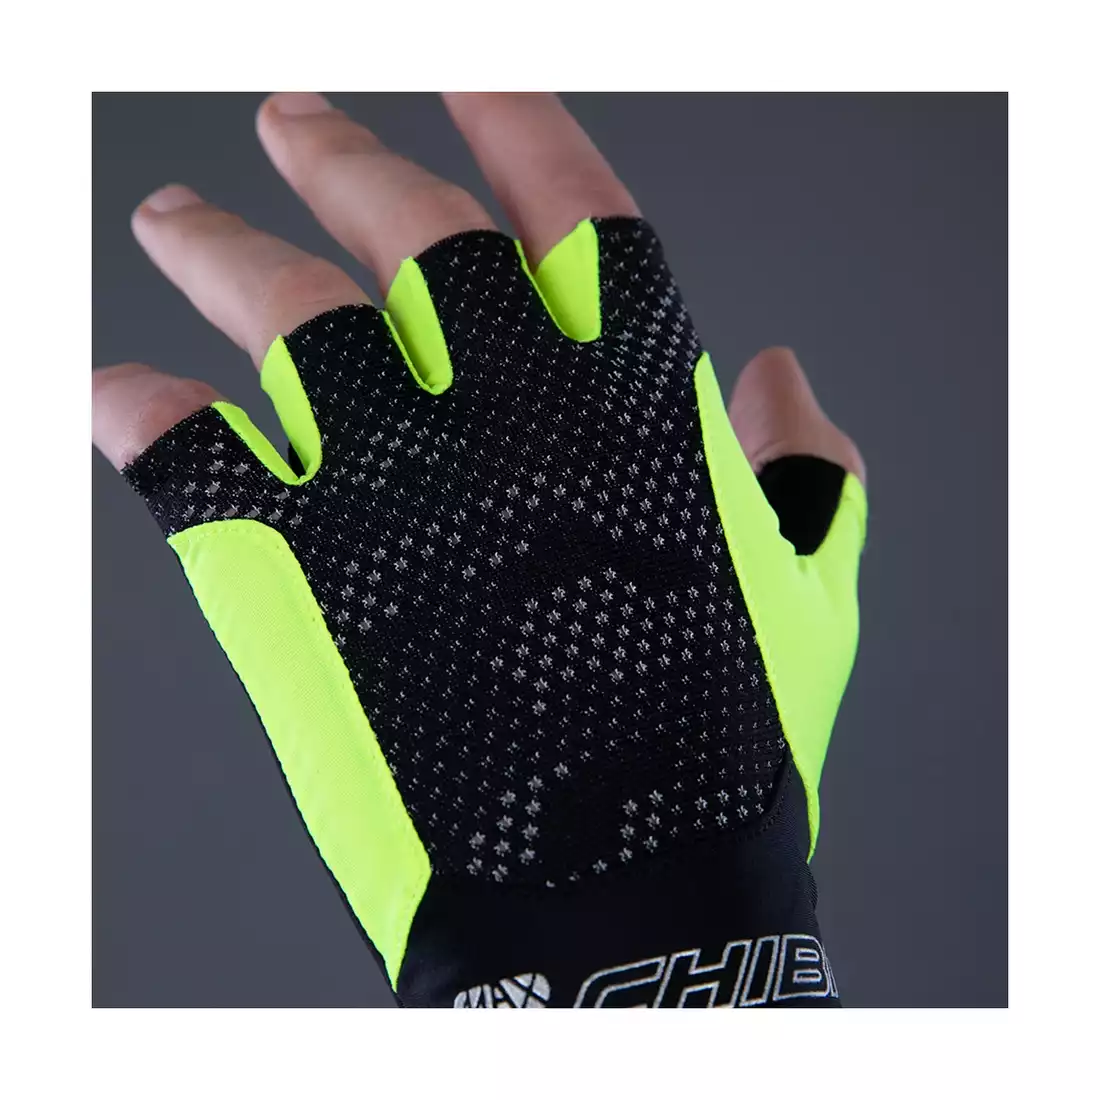 CHIBA PURE RACE cycling gloves, yellow